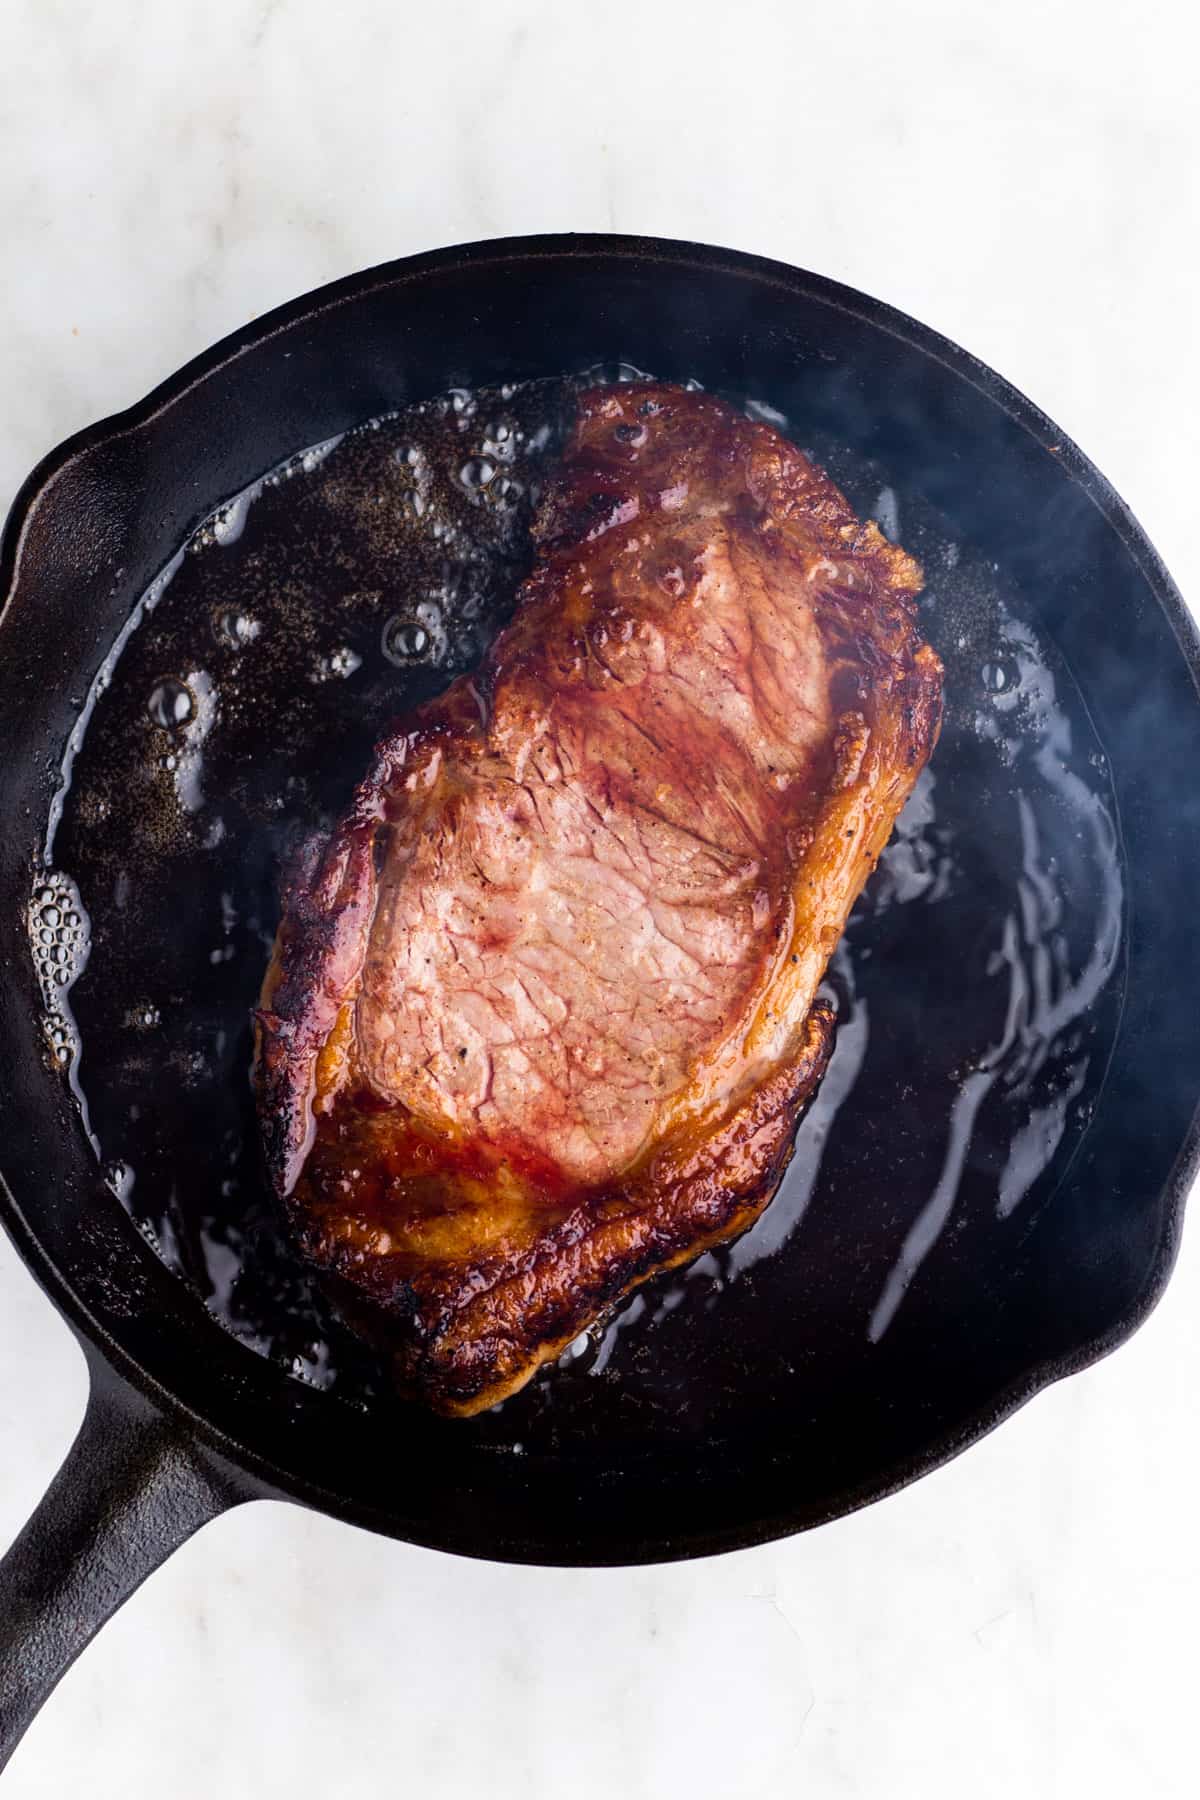 Seared steak in a skillet with butter and steam rising up.